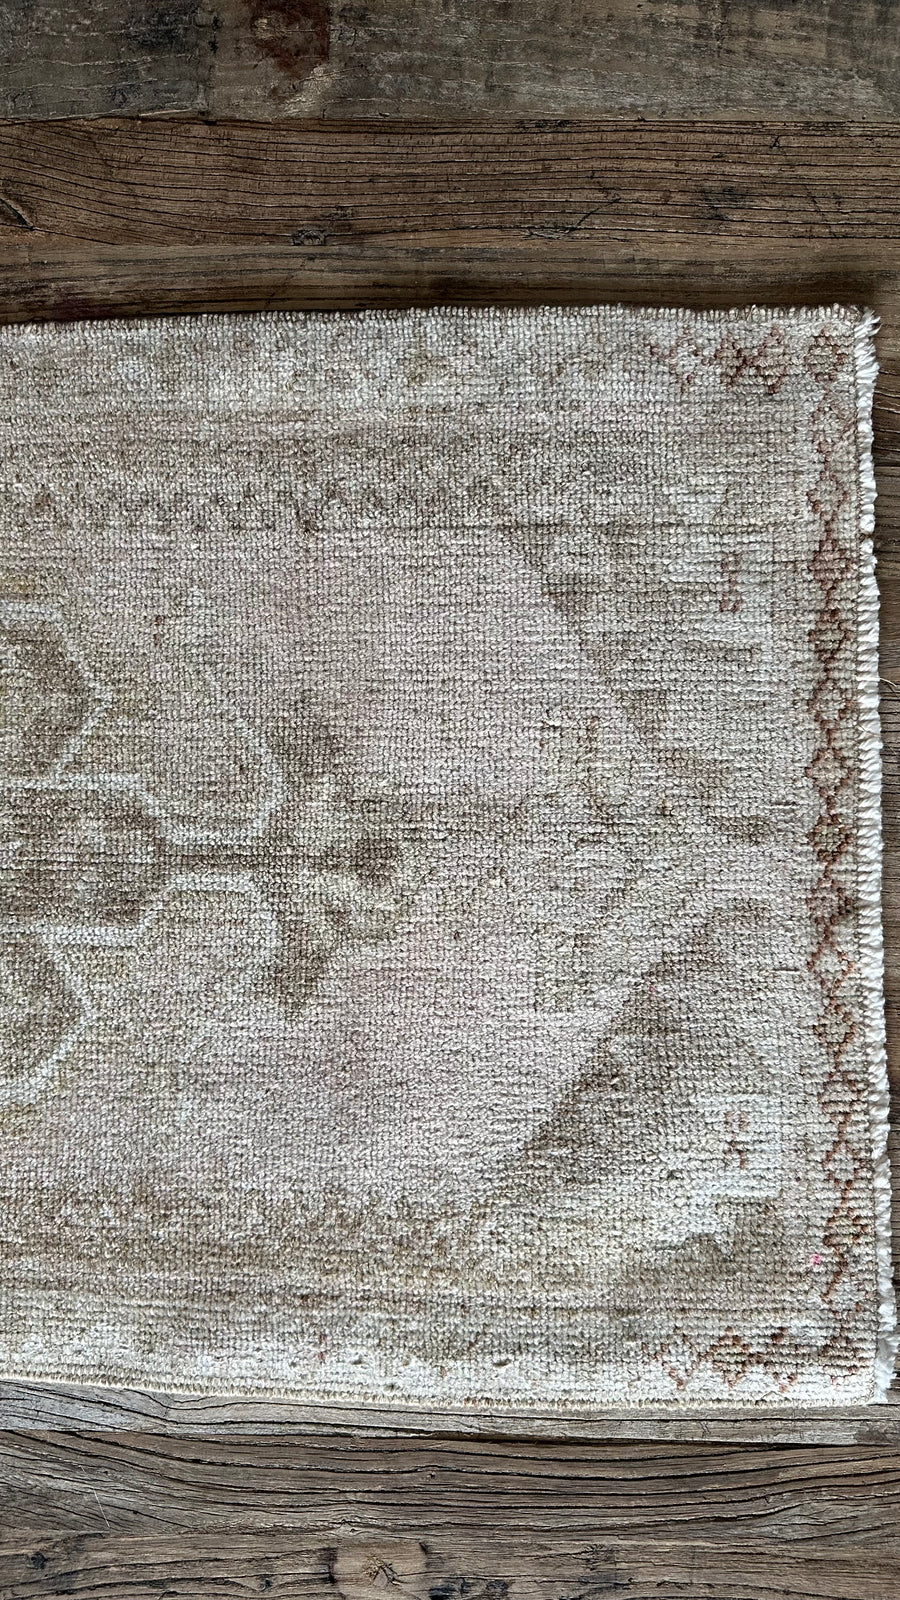 1’9 x 3’3 Antique Taspinar Rug Very Muted Monochromatic Palette